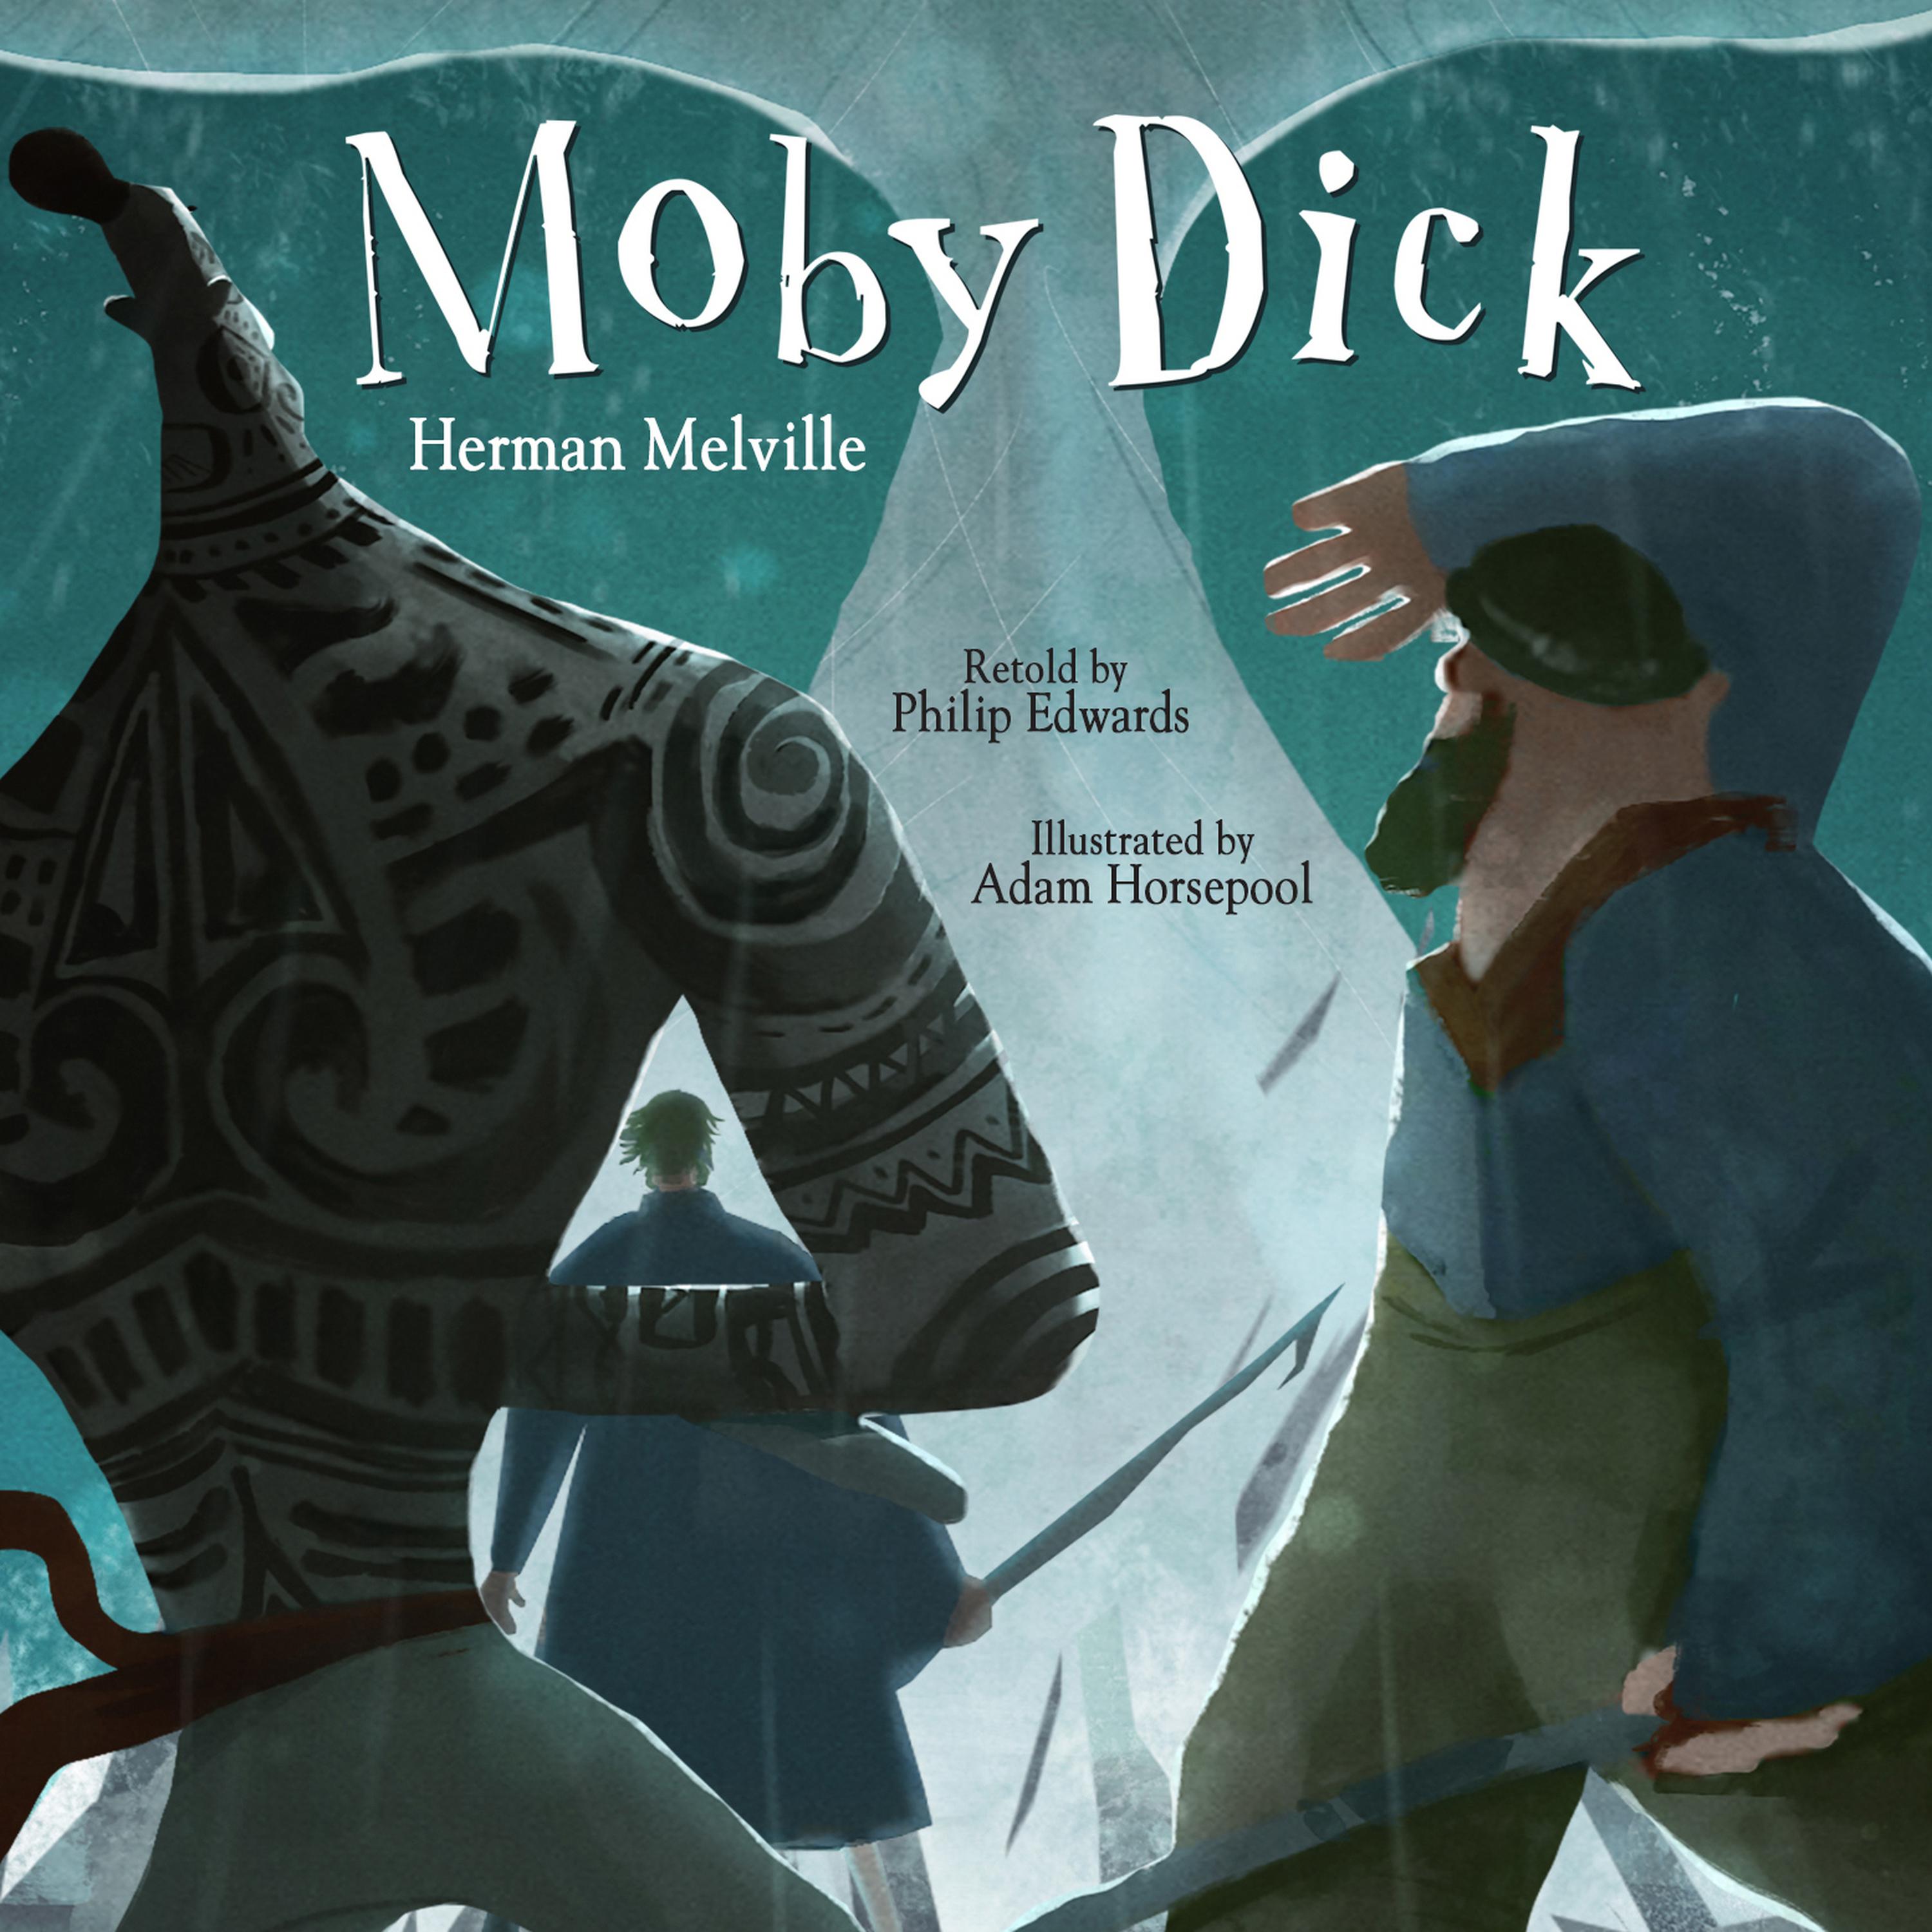 Moby dick audio book